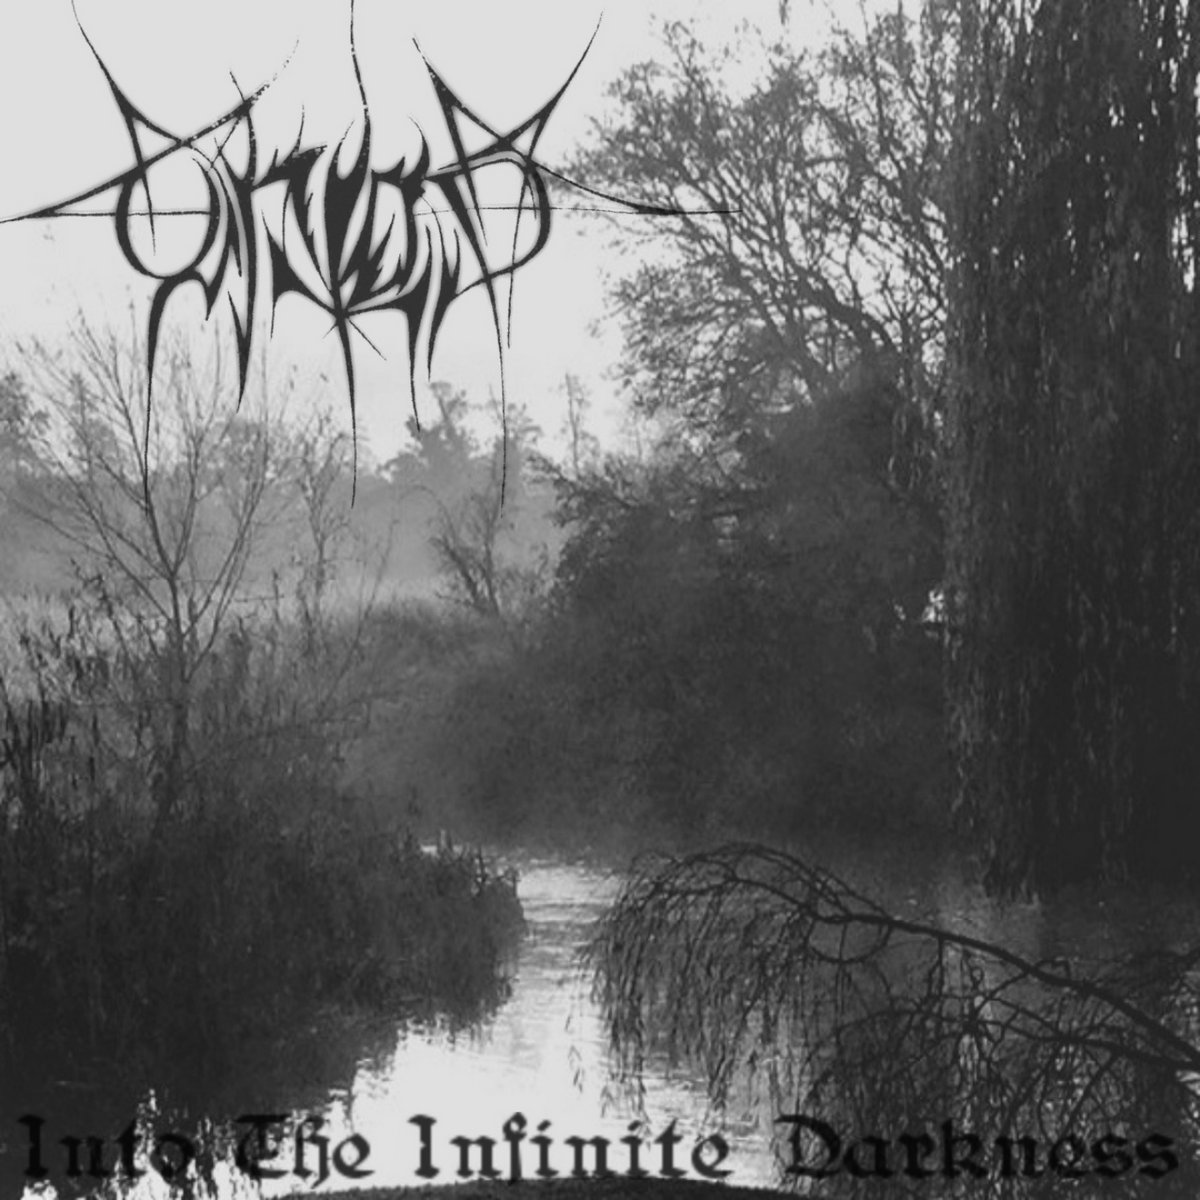 Endless Darkness. Cryptal Darkness endless tears обложка альбома. Fear of Eternity 2006 - Spirit of Sorrow. Dark endless Dreams of Sadness. Into onto